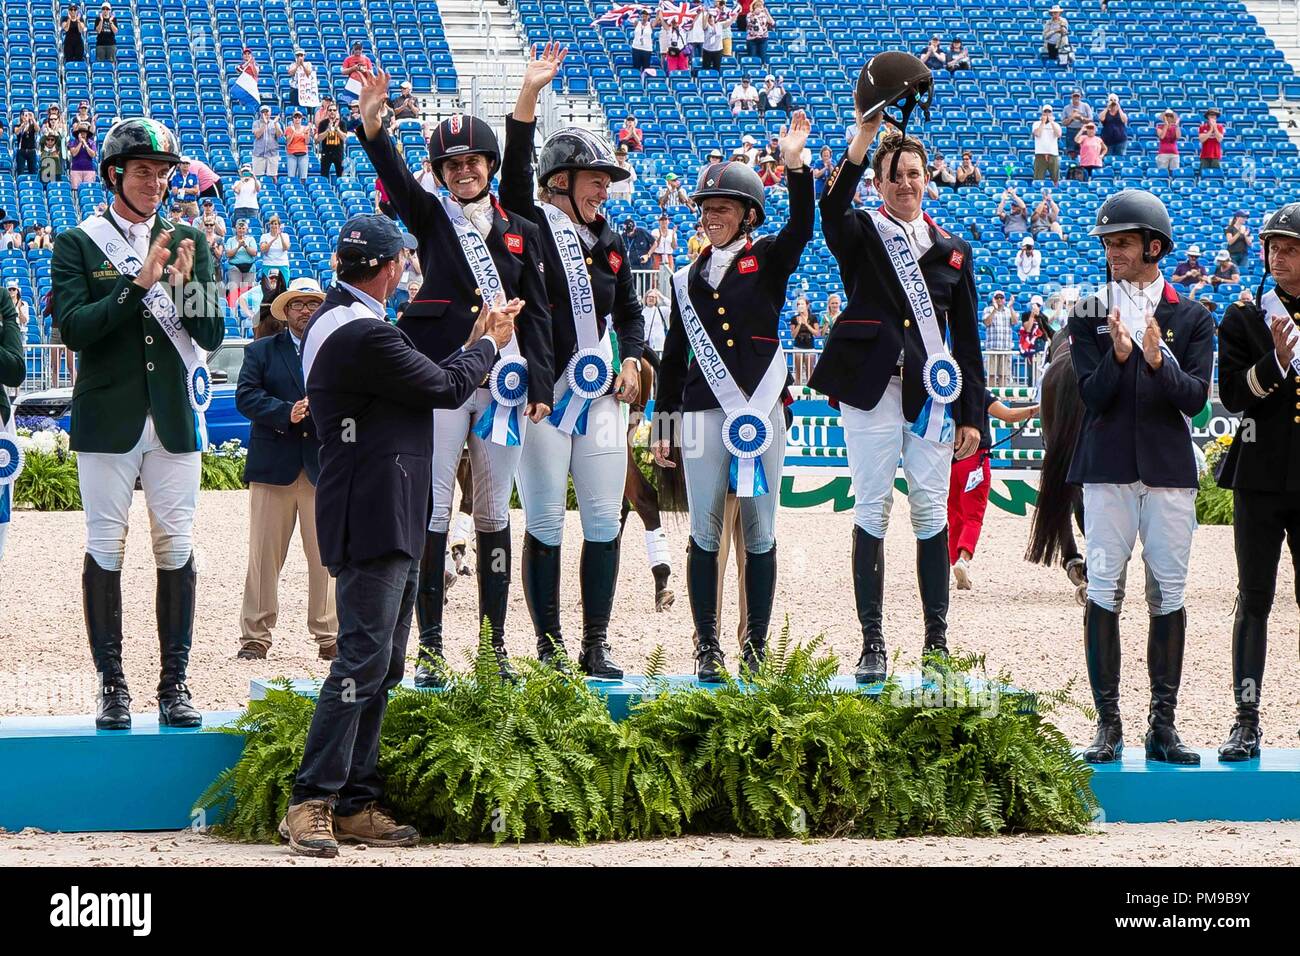 pack Slepen verraad Tryon, USA. 17th September 2018. Medal Podium. Team GBR in Gold Position.  Rosalind Canter. Piggy French. Tom Mcewan. Kristina Cook. Eventing Show  Jumping Day 6. World Equestrian Games. WEG 2018 Tryon. North